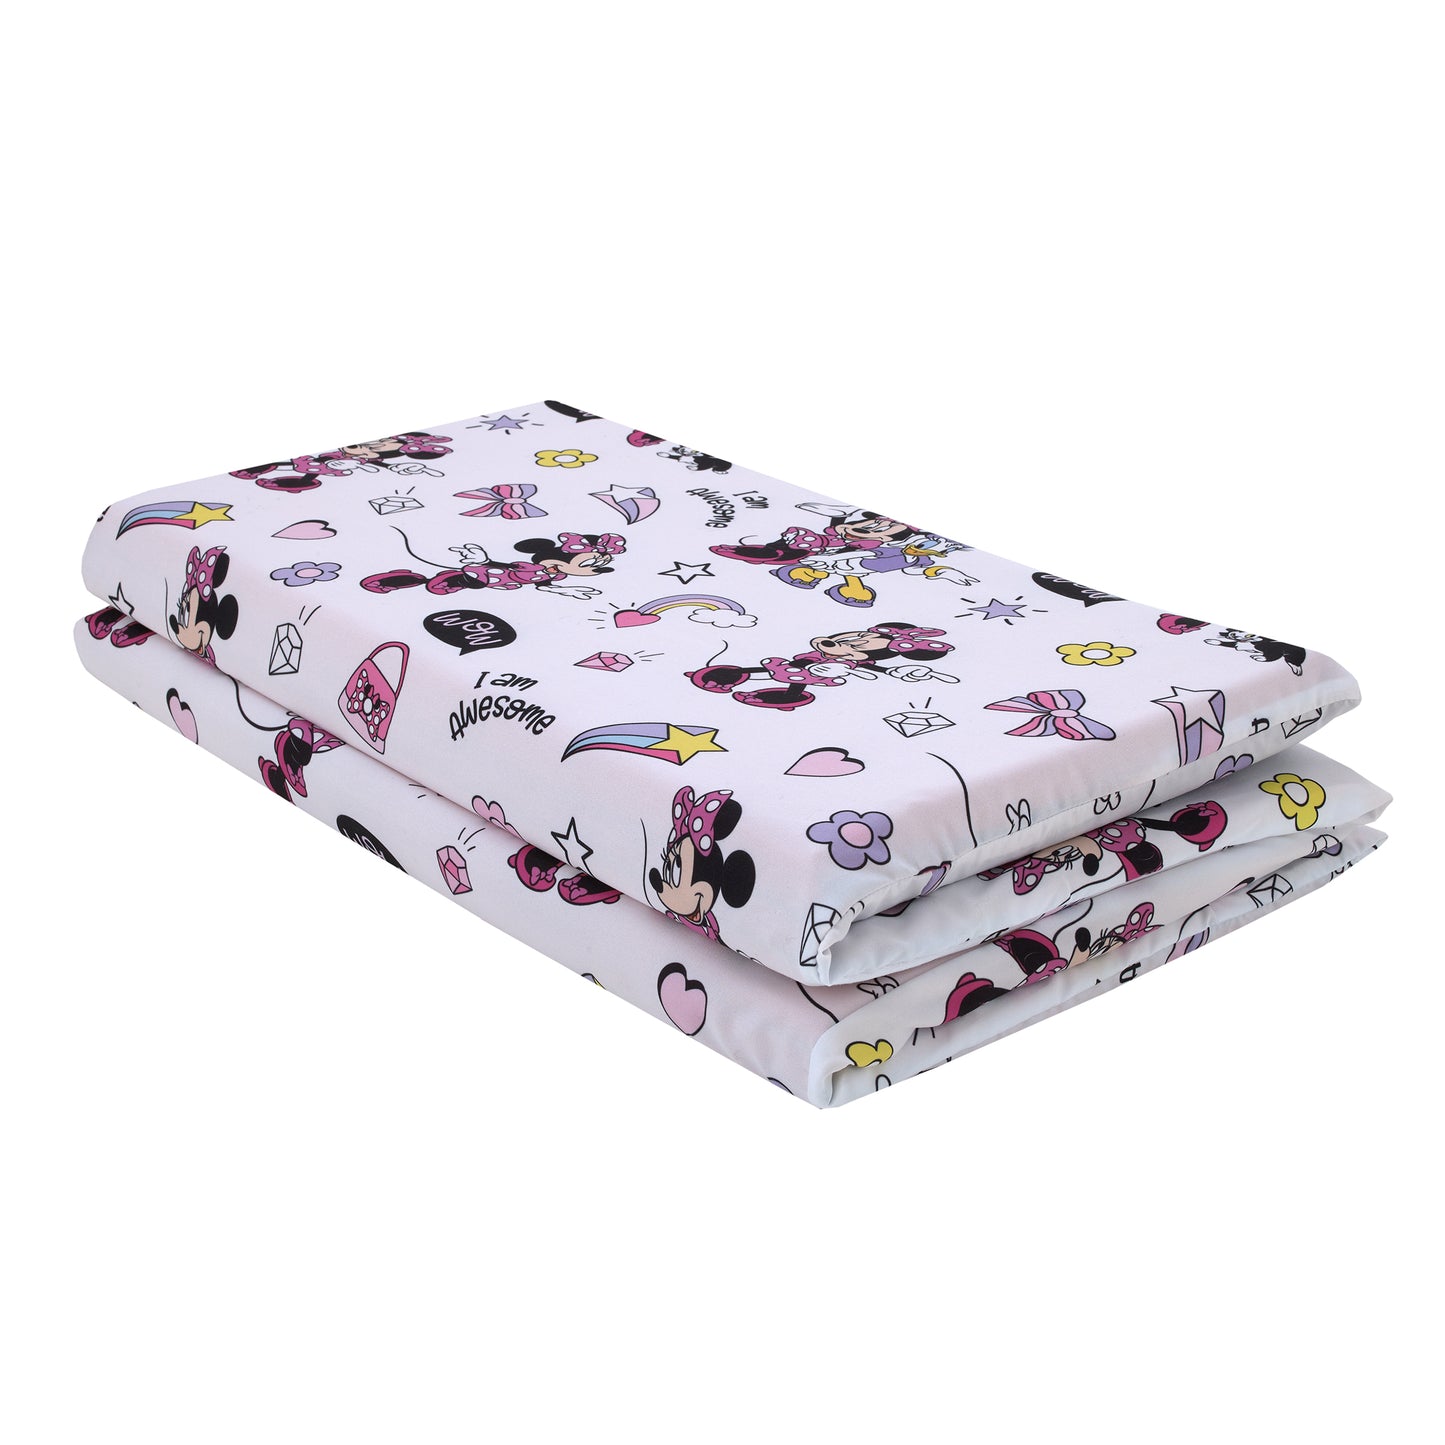 Disney Minnie Mouse I am Awesome Lavender, Pink and White, Daisy Duck Rainbow Hearts and Stars Preschool Nap Pad Sheet